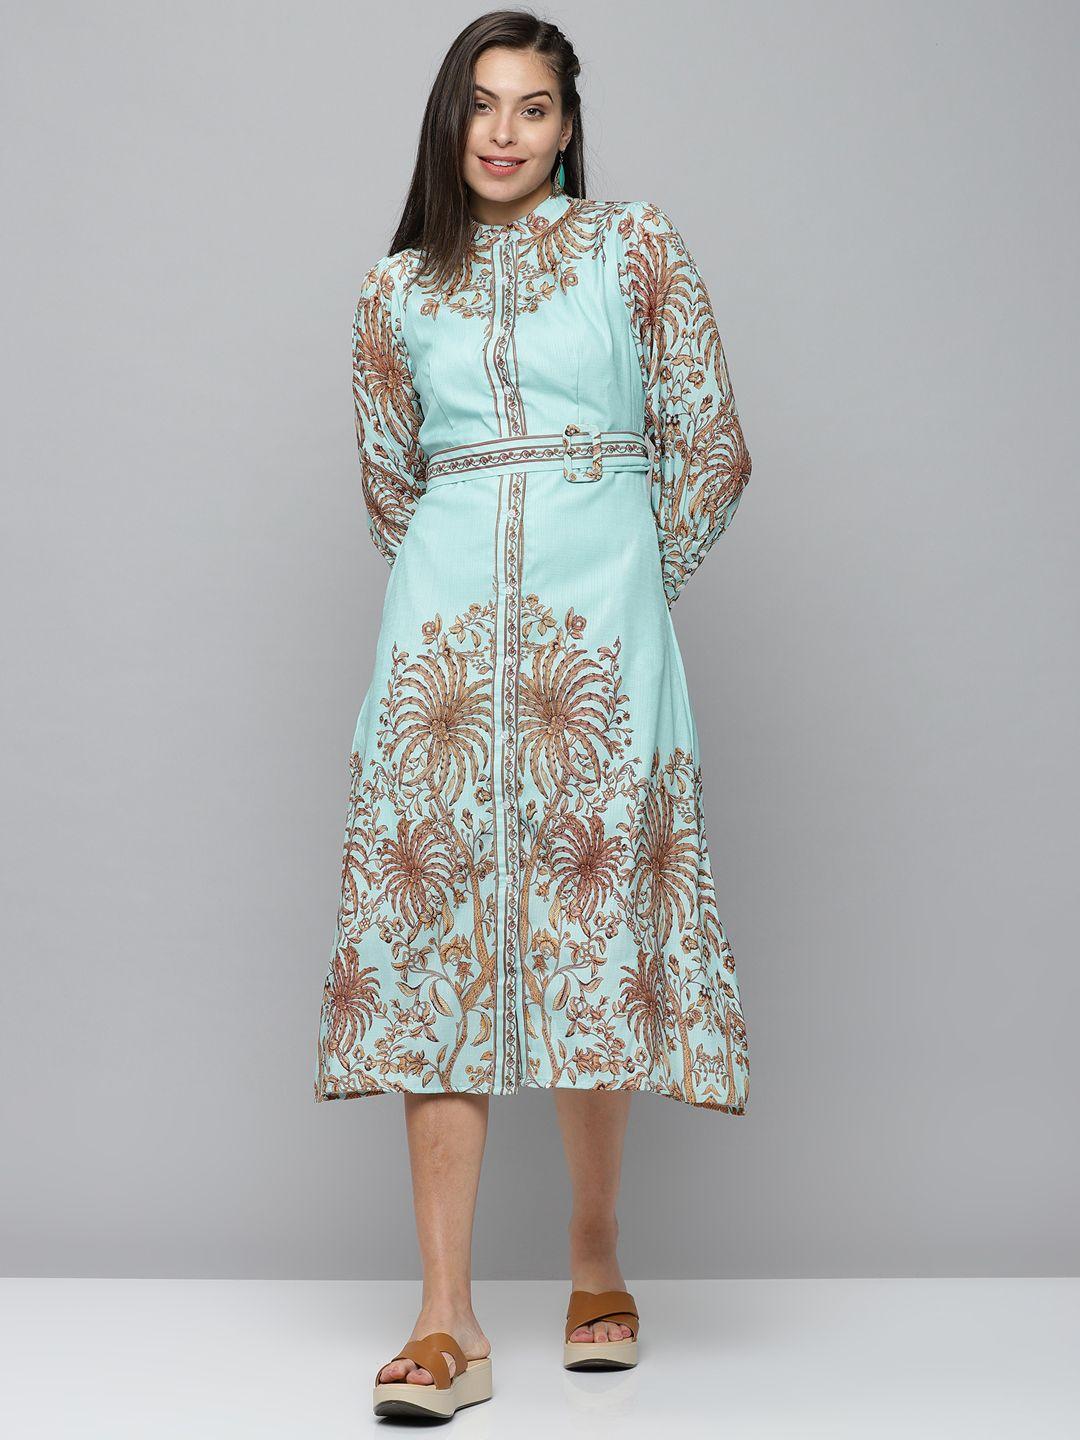 showoff-women-turquoise-blue-floral-printed-midi-dress